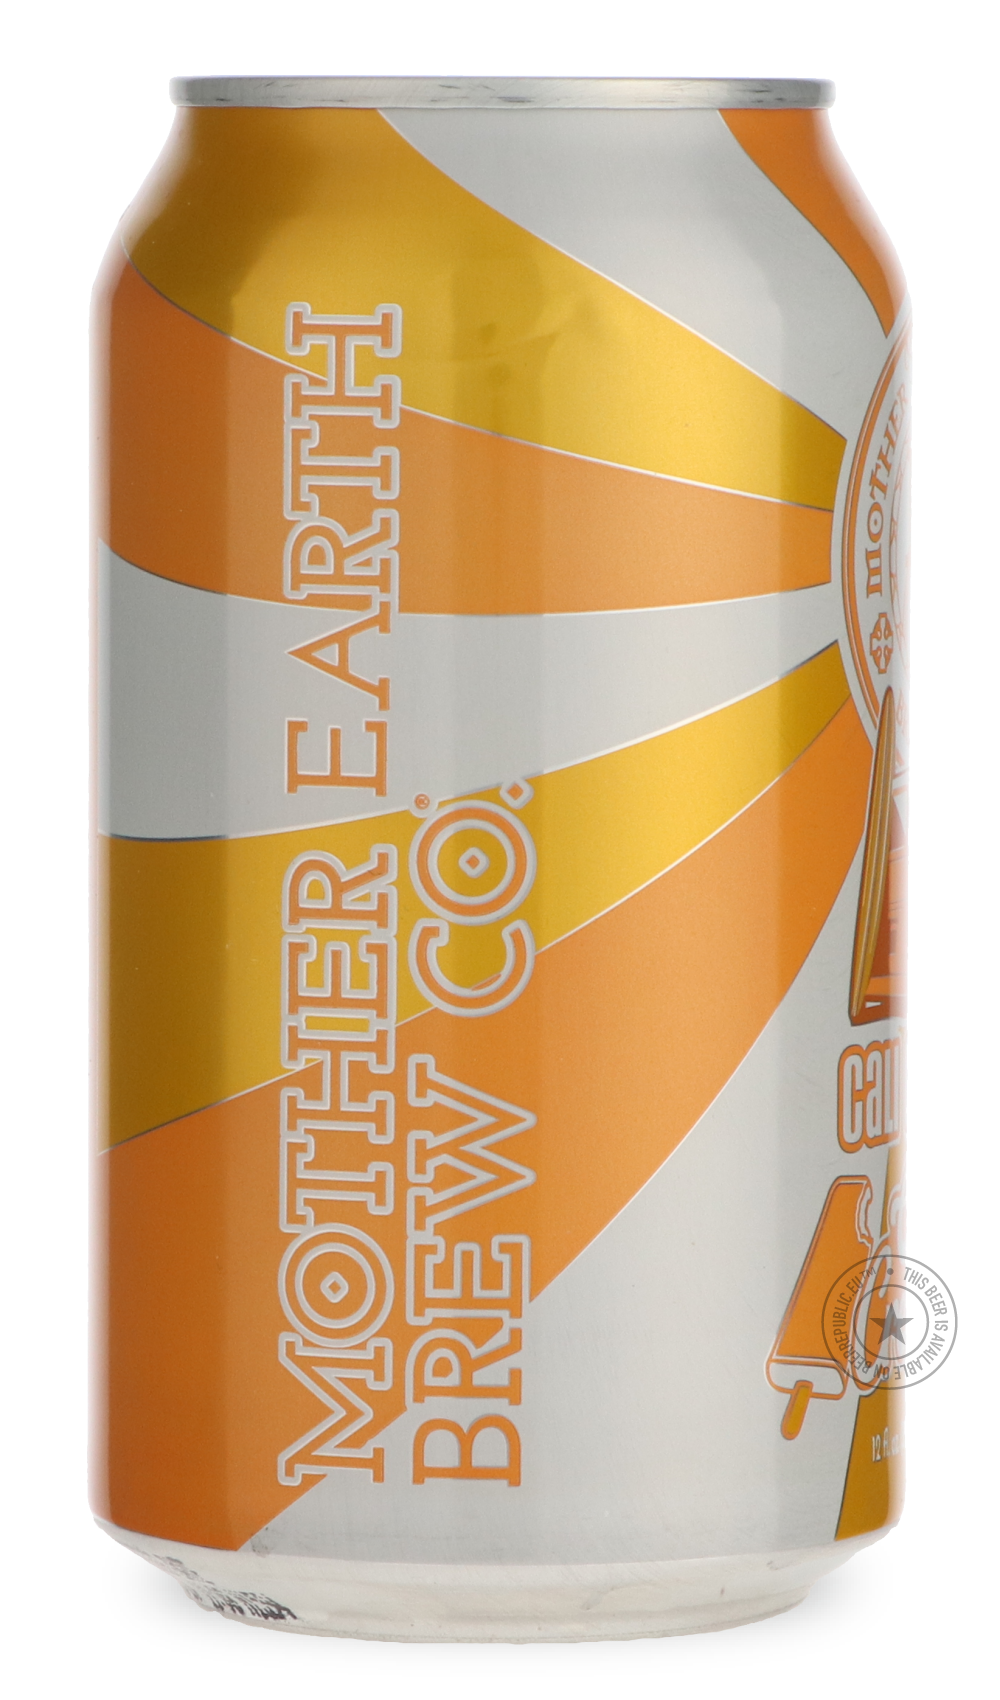 -Mother Earth- Cali Creamin' Orange Creamsicle-Pale- Only @ Beer Republic - The best online beer store for American & Canadian craft beer - Buy beer online from the USA and Canada - Bier online kopen - Amerikaans bier kopen - Craft beer store - Craft beer kopen - Amerikanisch bier kaufen - Bier online kaufen - Acheter biere online - IPA - Stout - Porter - New England IPA - Hazy IPA - Imperial Stout - Barrel Aged - Barrel Aged Imperial Stout - Brown - Dark beer - Blond - Blonde - Pilsner - Lager - Wheat - We